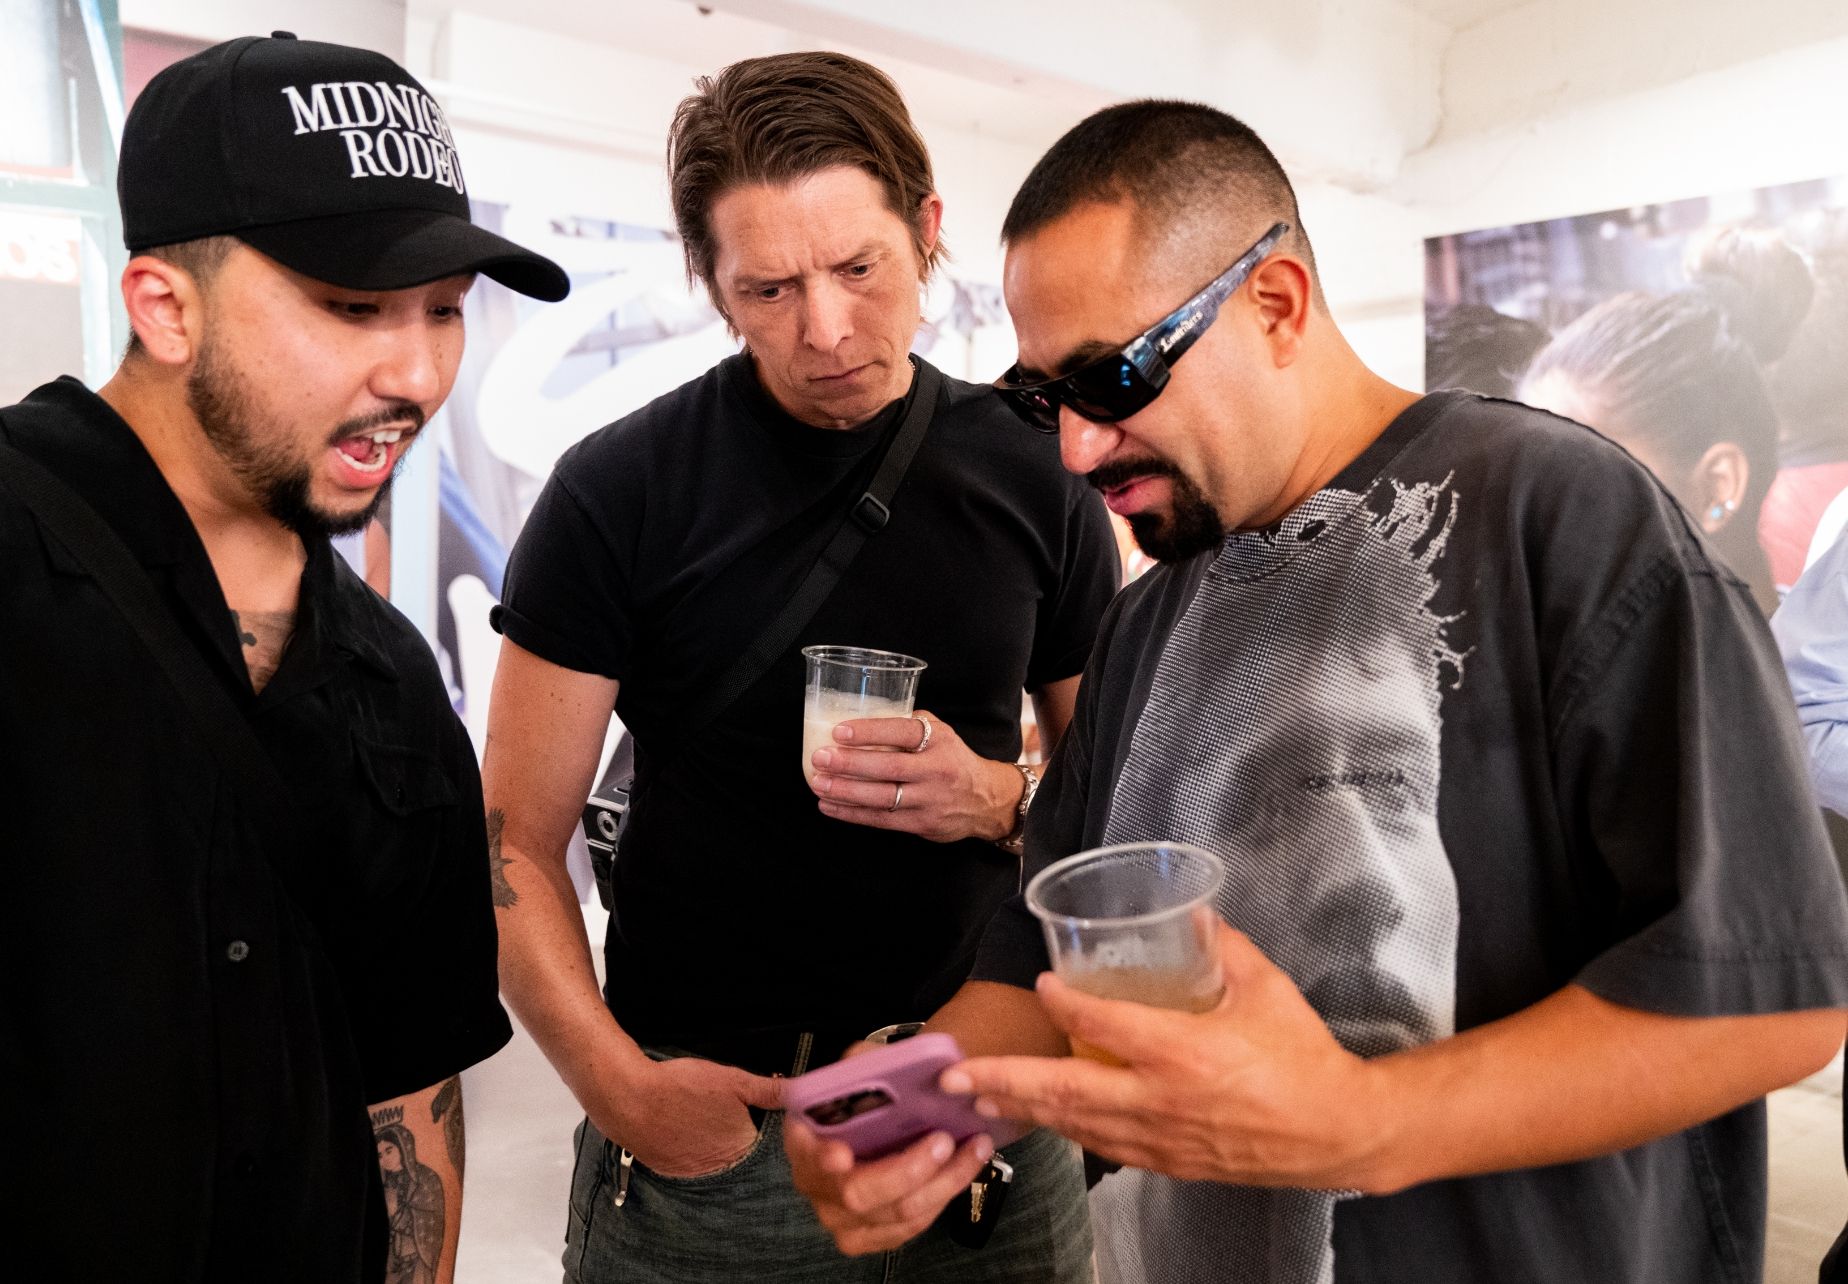 Dorina Lopez shows two gallery show attendees something on his phone. One man has mouth open and the other two have drinks in their hand